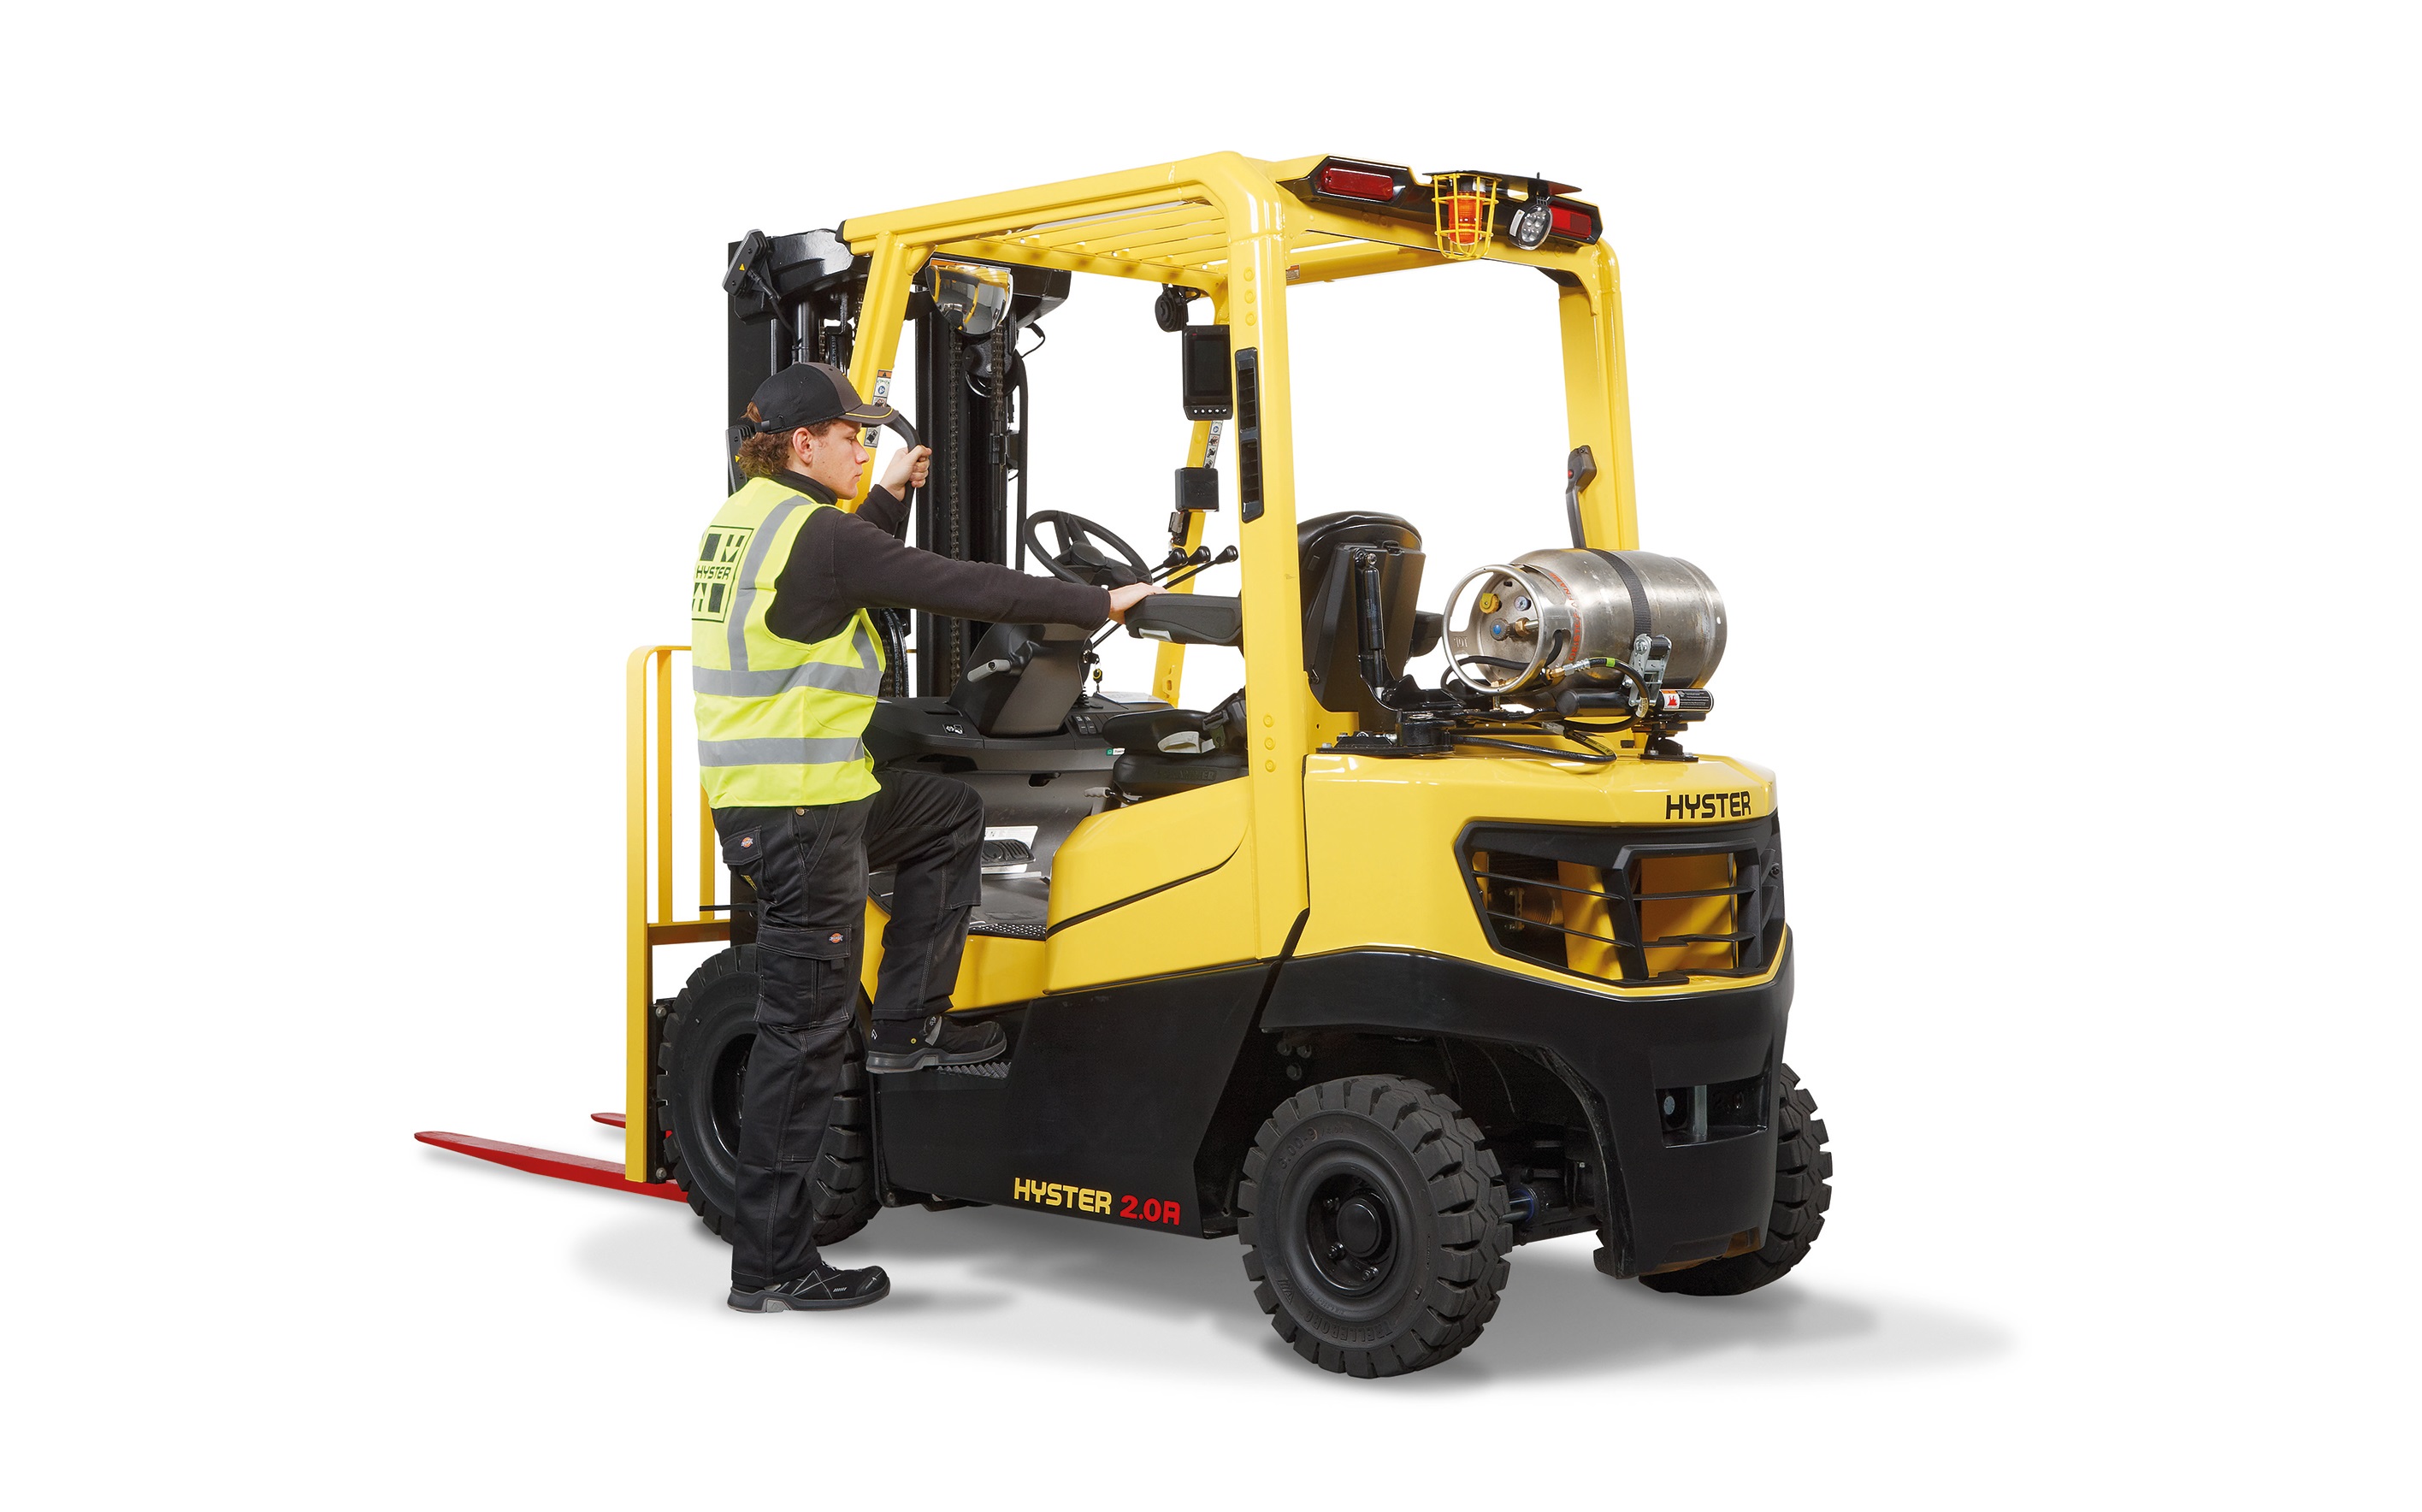 Hyster A Series Forklifts Win 2022 Archies Award for Ergonomics